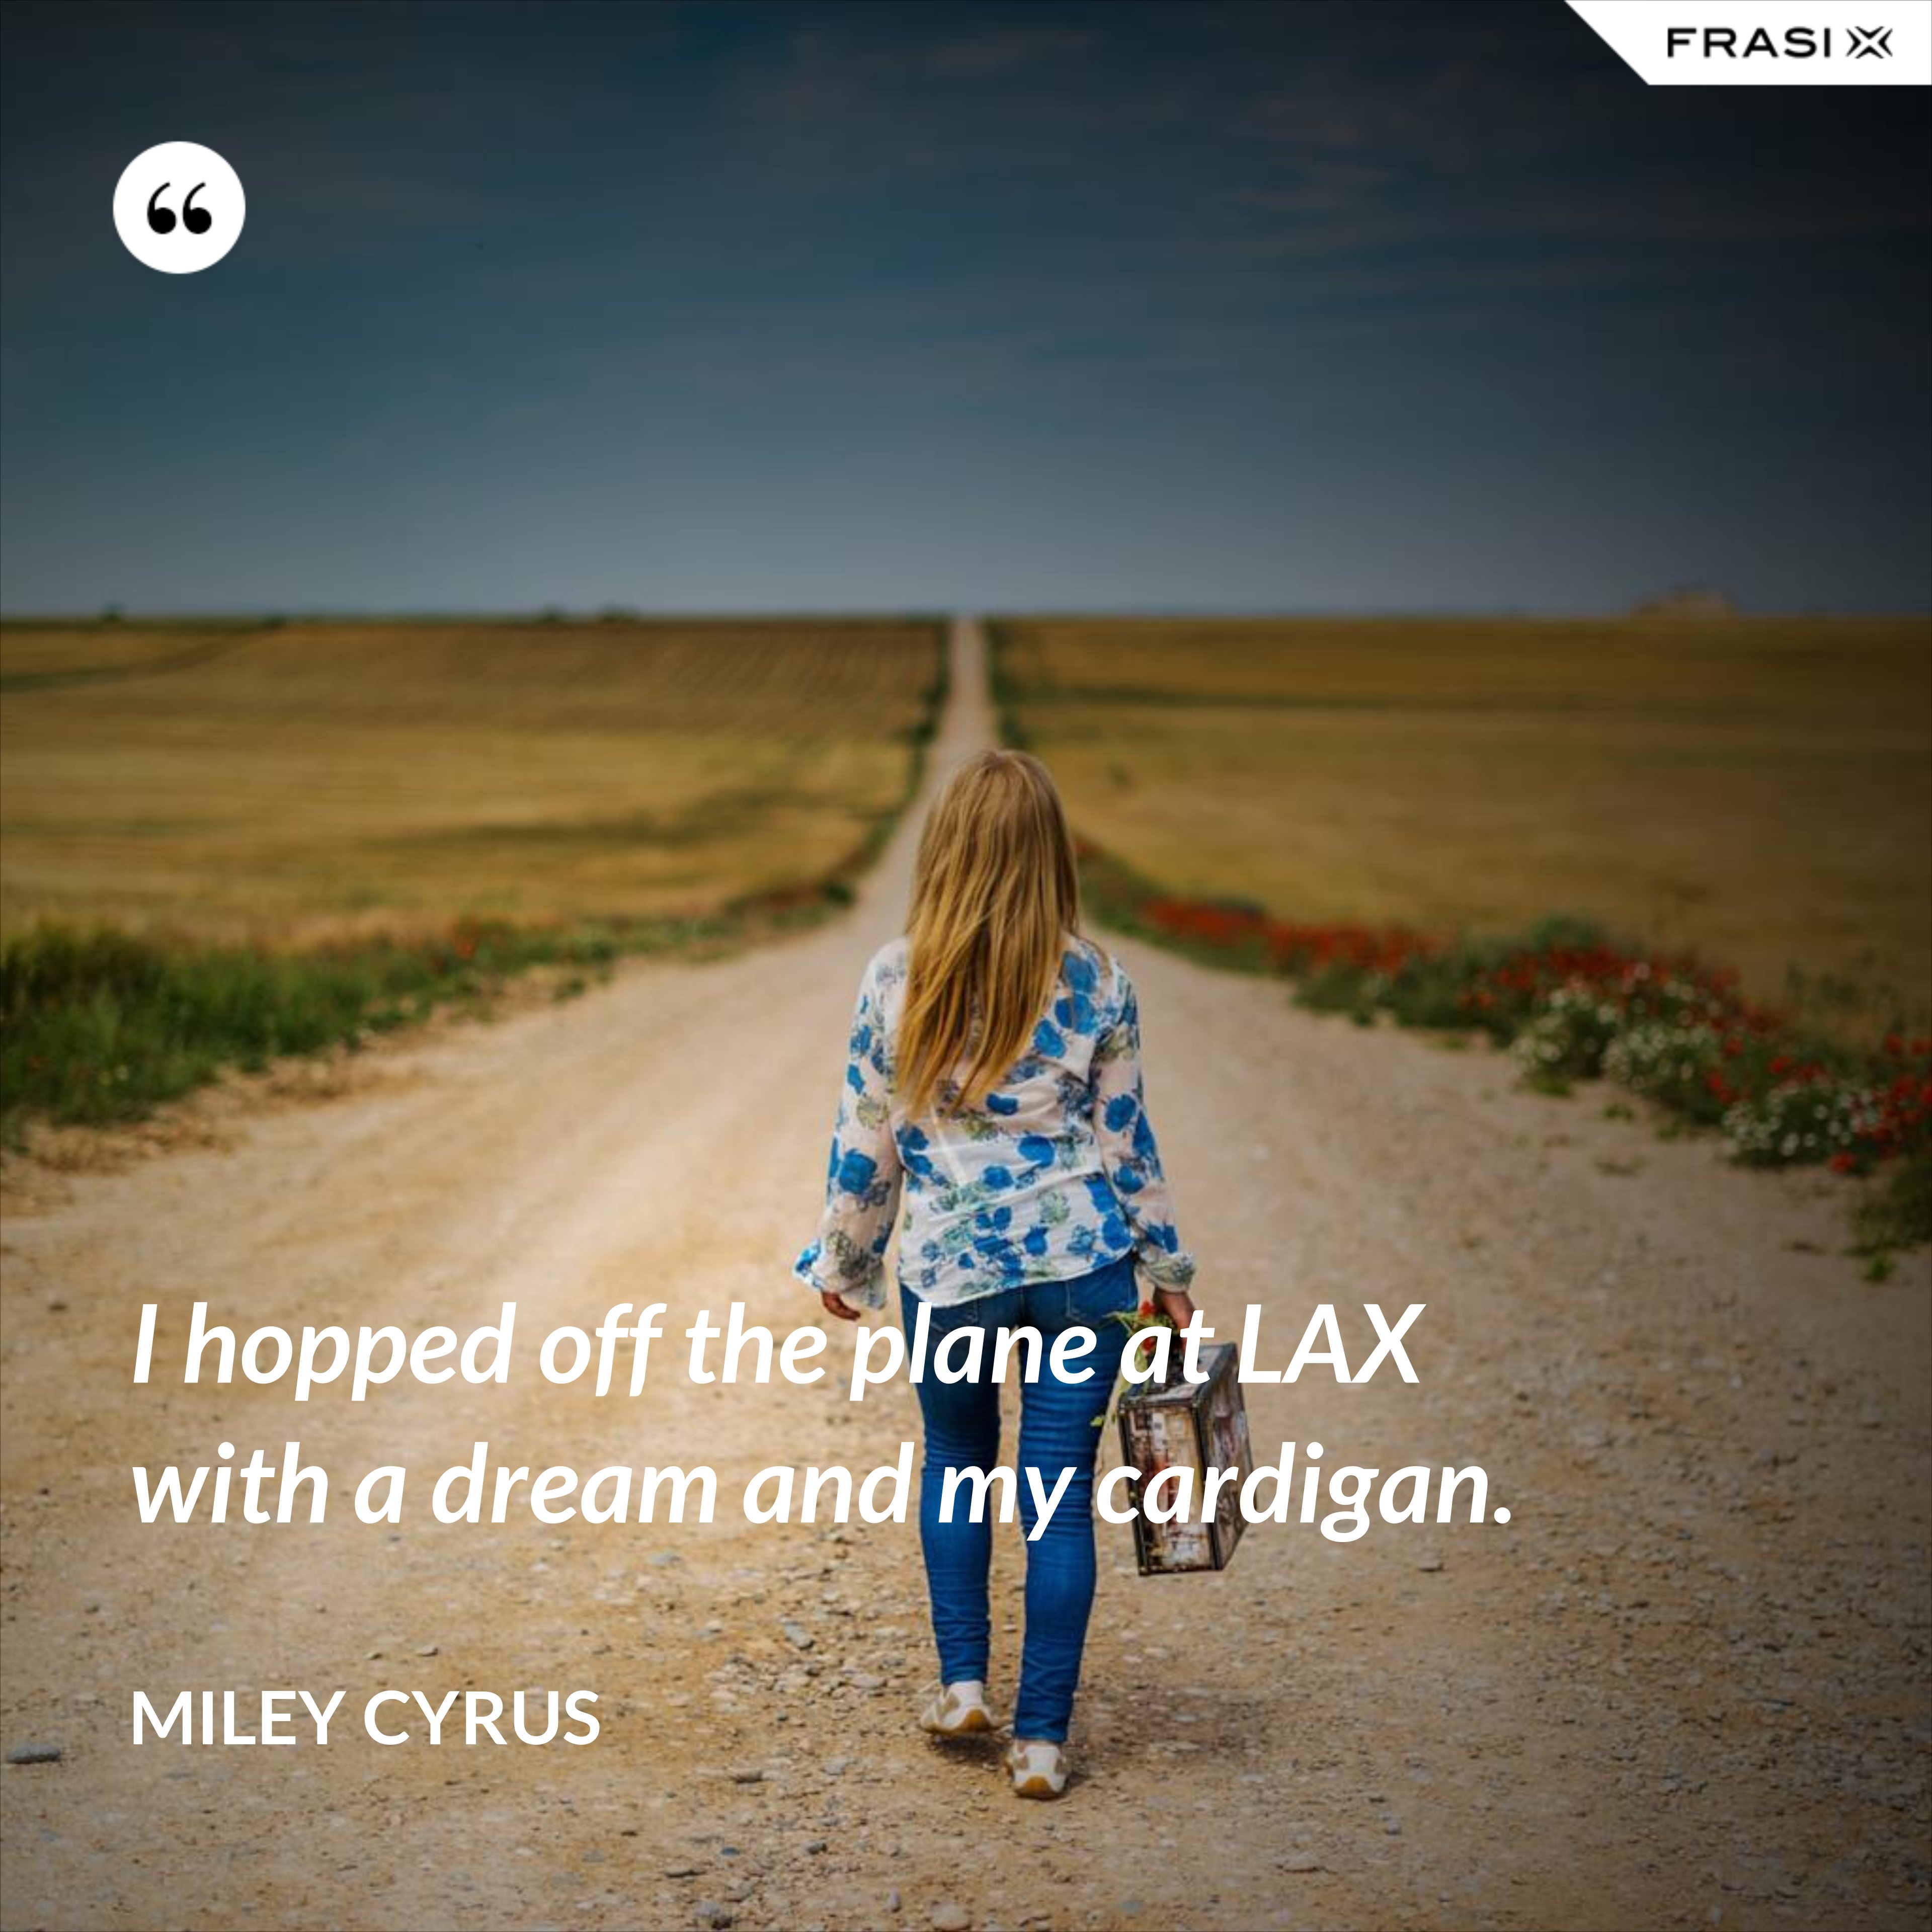 I hopped off the plane at LAX with a dream and my cardigan. - Miley Cyrus